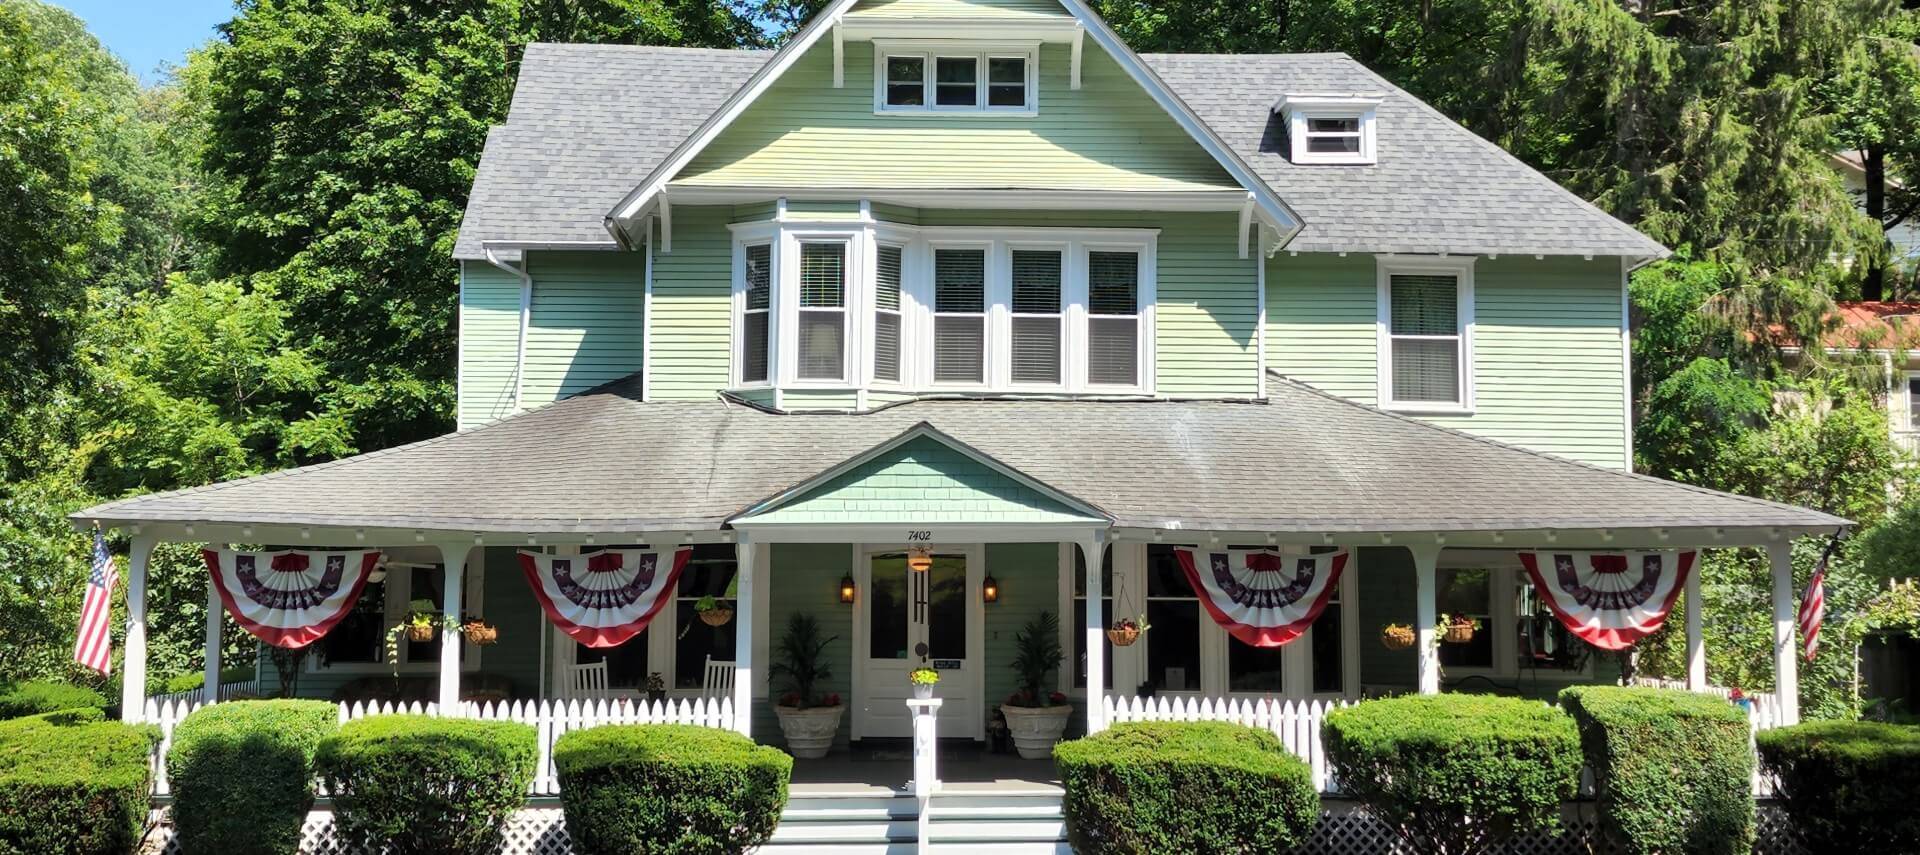 Large home with light green siding and wrap around porch with American bunting flags